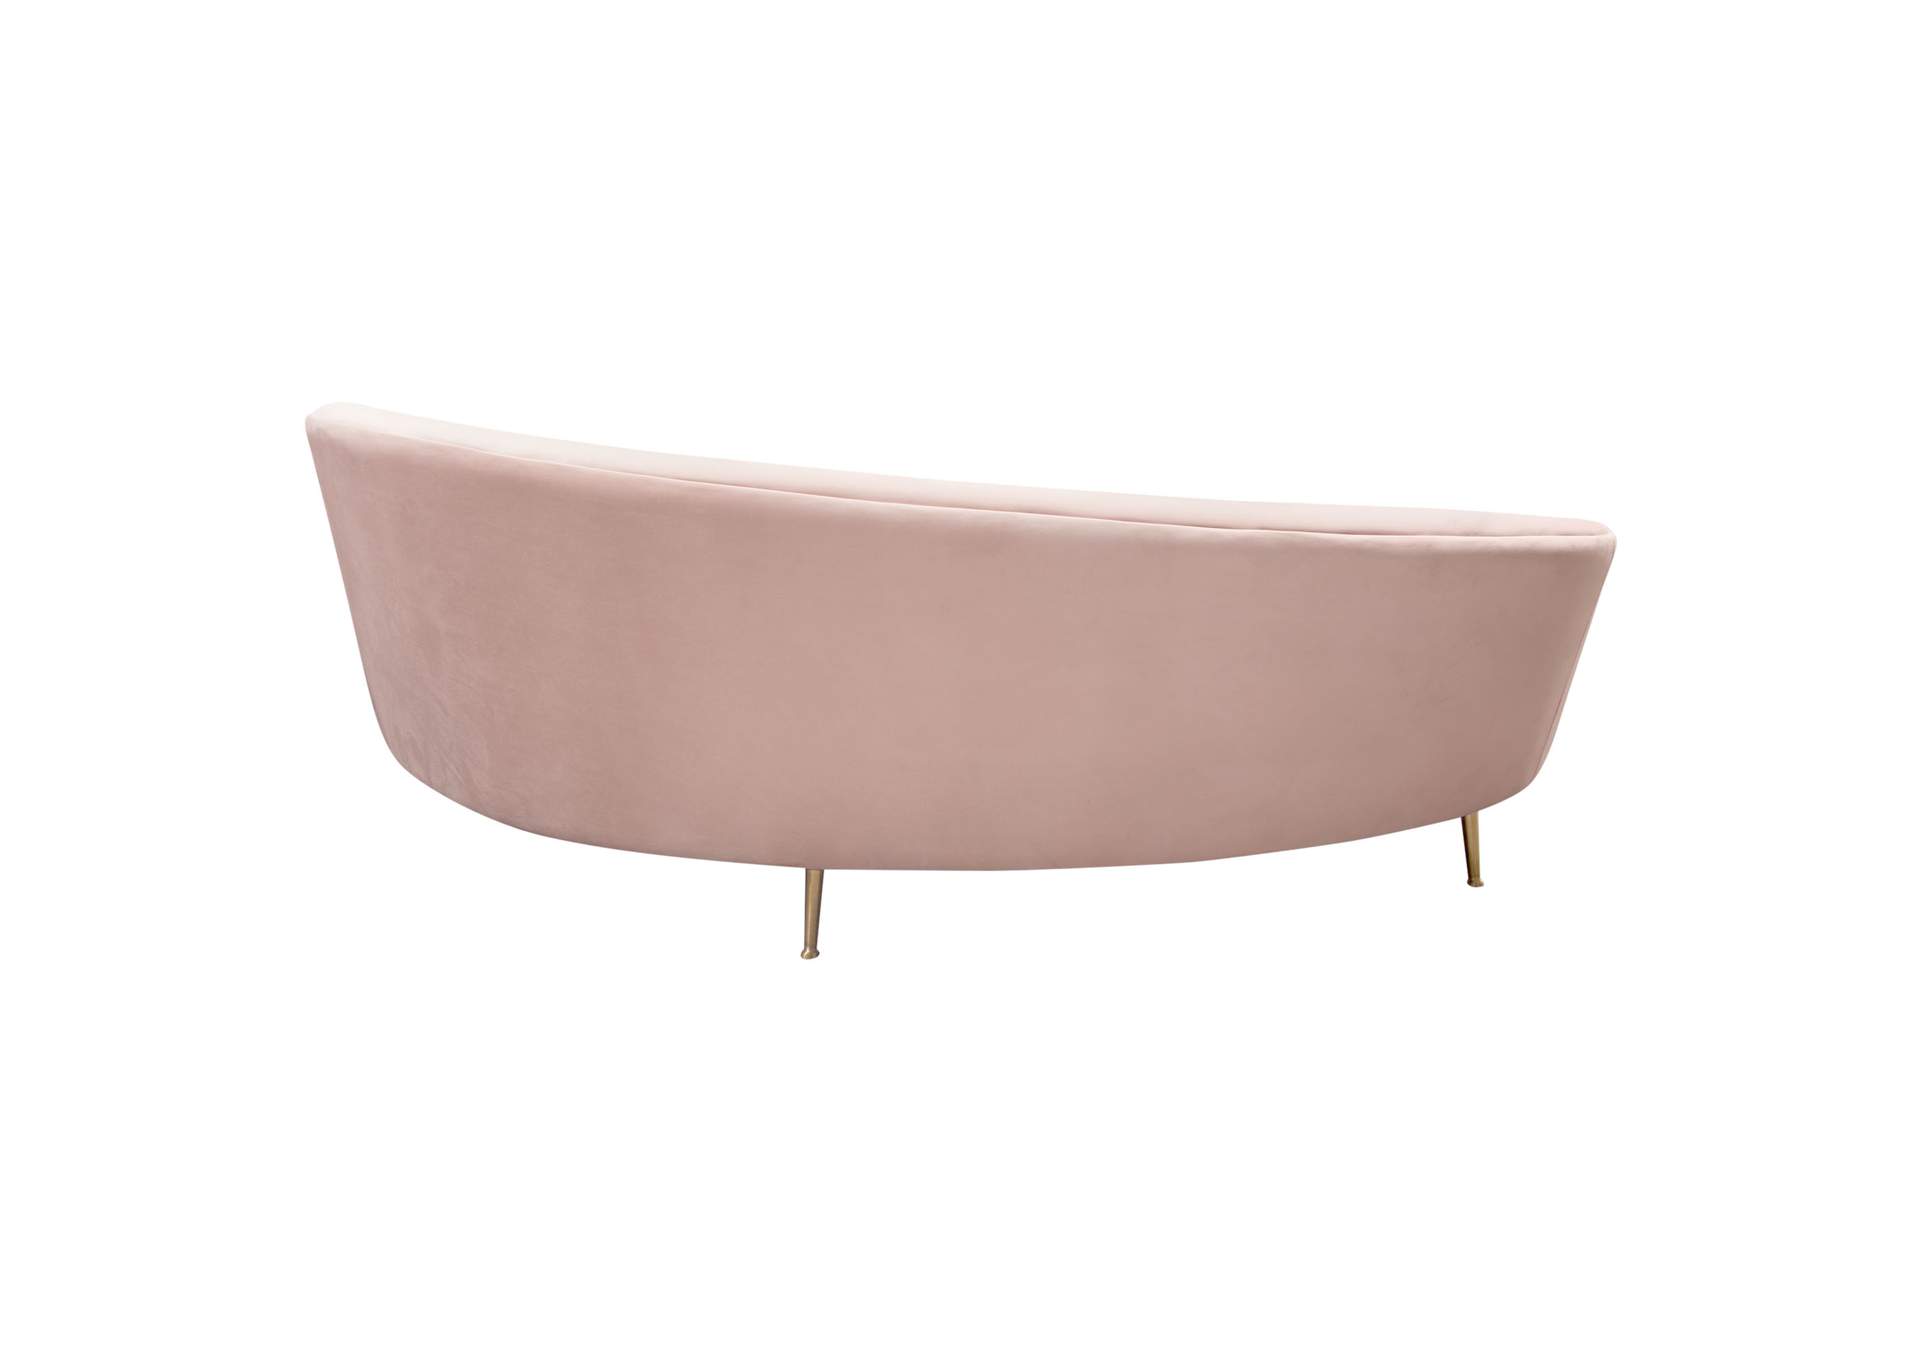 Celine Curved Sofa with Contoured Back in Blush Pink Velvet and Gold Metal Legs by Diamond Sofa,Diamond Sofa